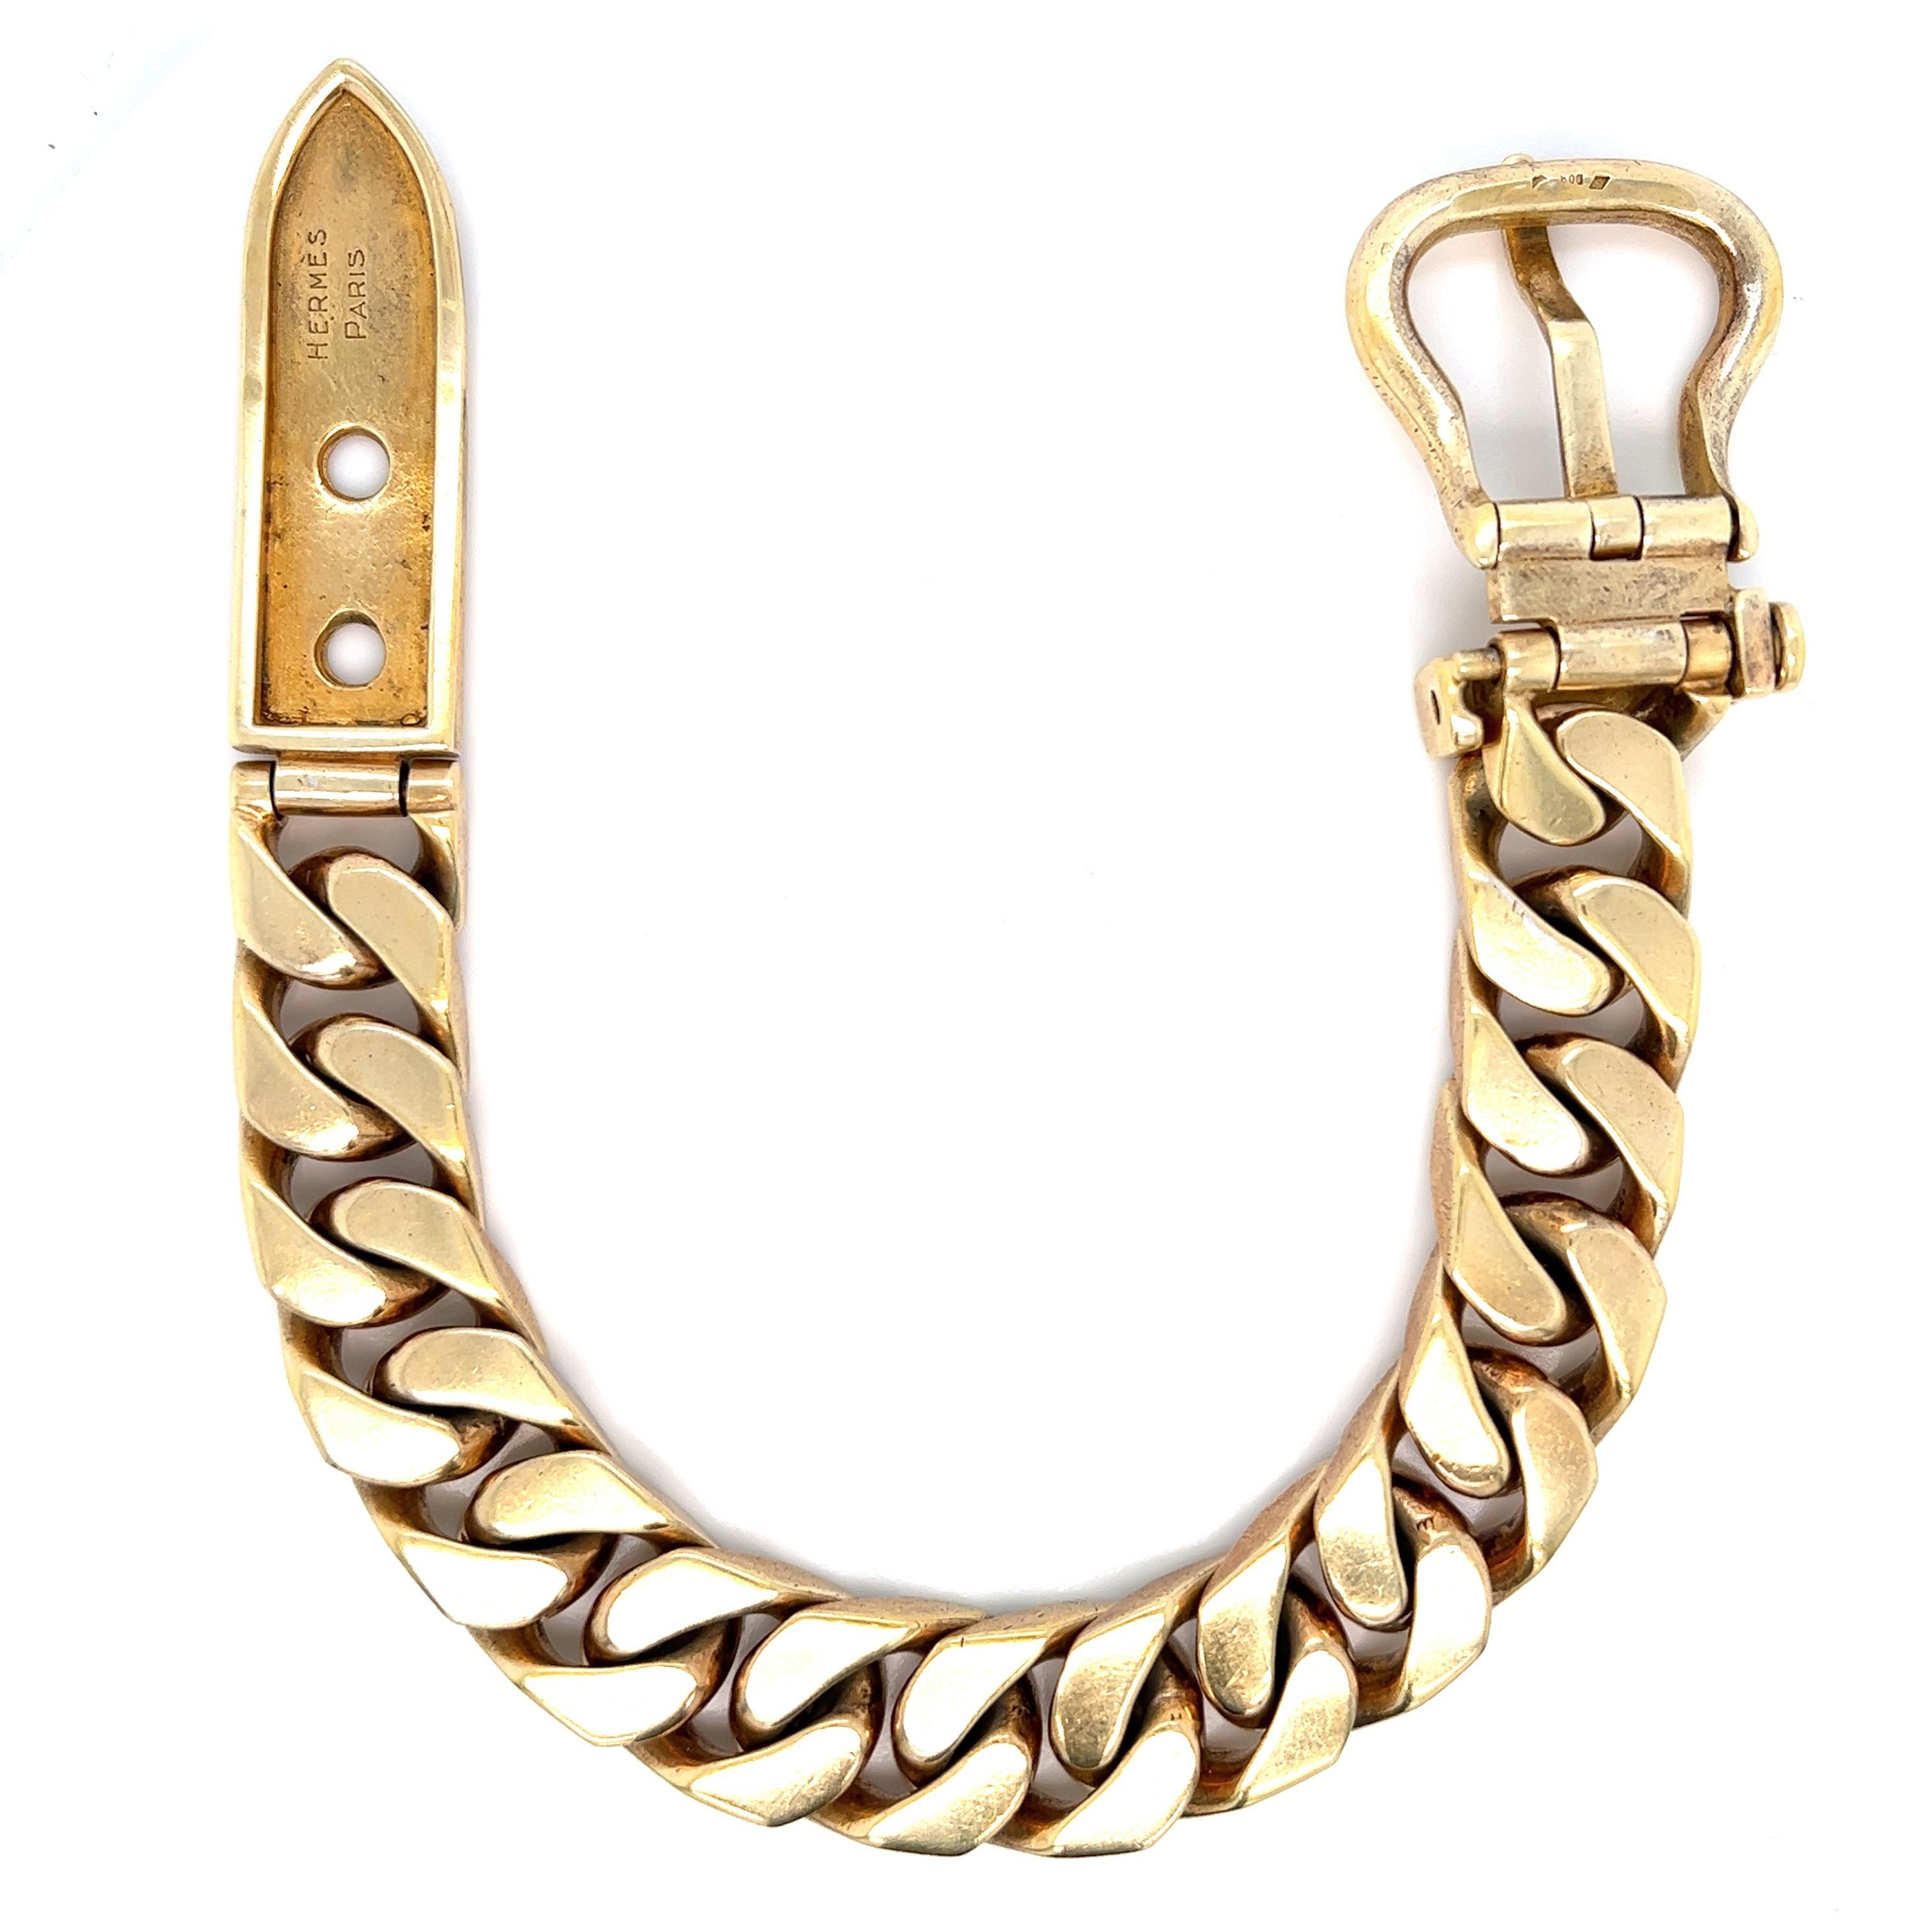 Hermés vermeil gold bracelet in the form of a belt buckle. Circa 1950s. It can fit wrist 8 inches up to 8.5 inches. Marked: Hermés / Paris. Total weight: 113.3 grams. Width: 0.5 inch. Length: 9.5 inches. 